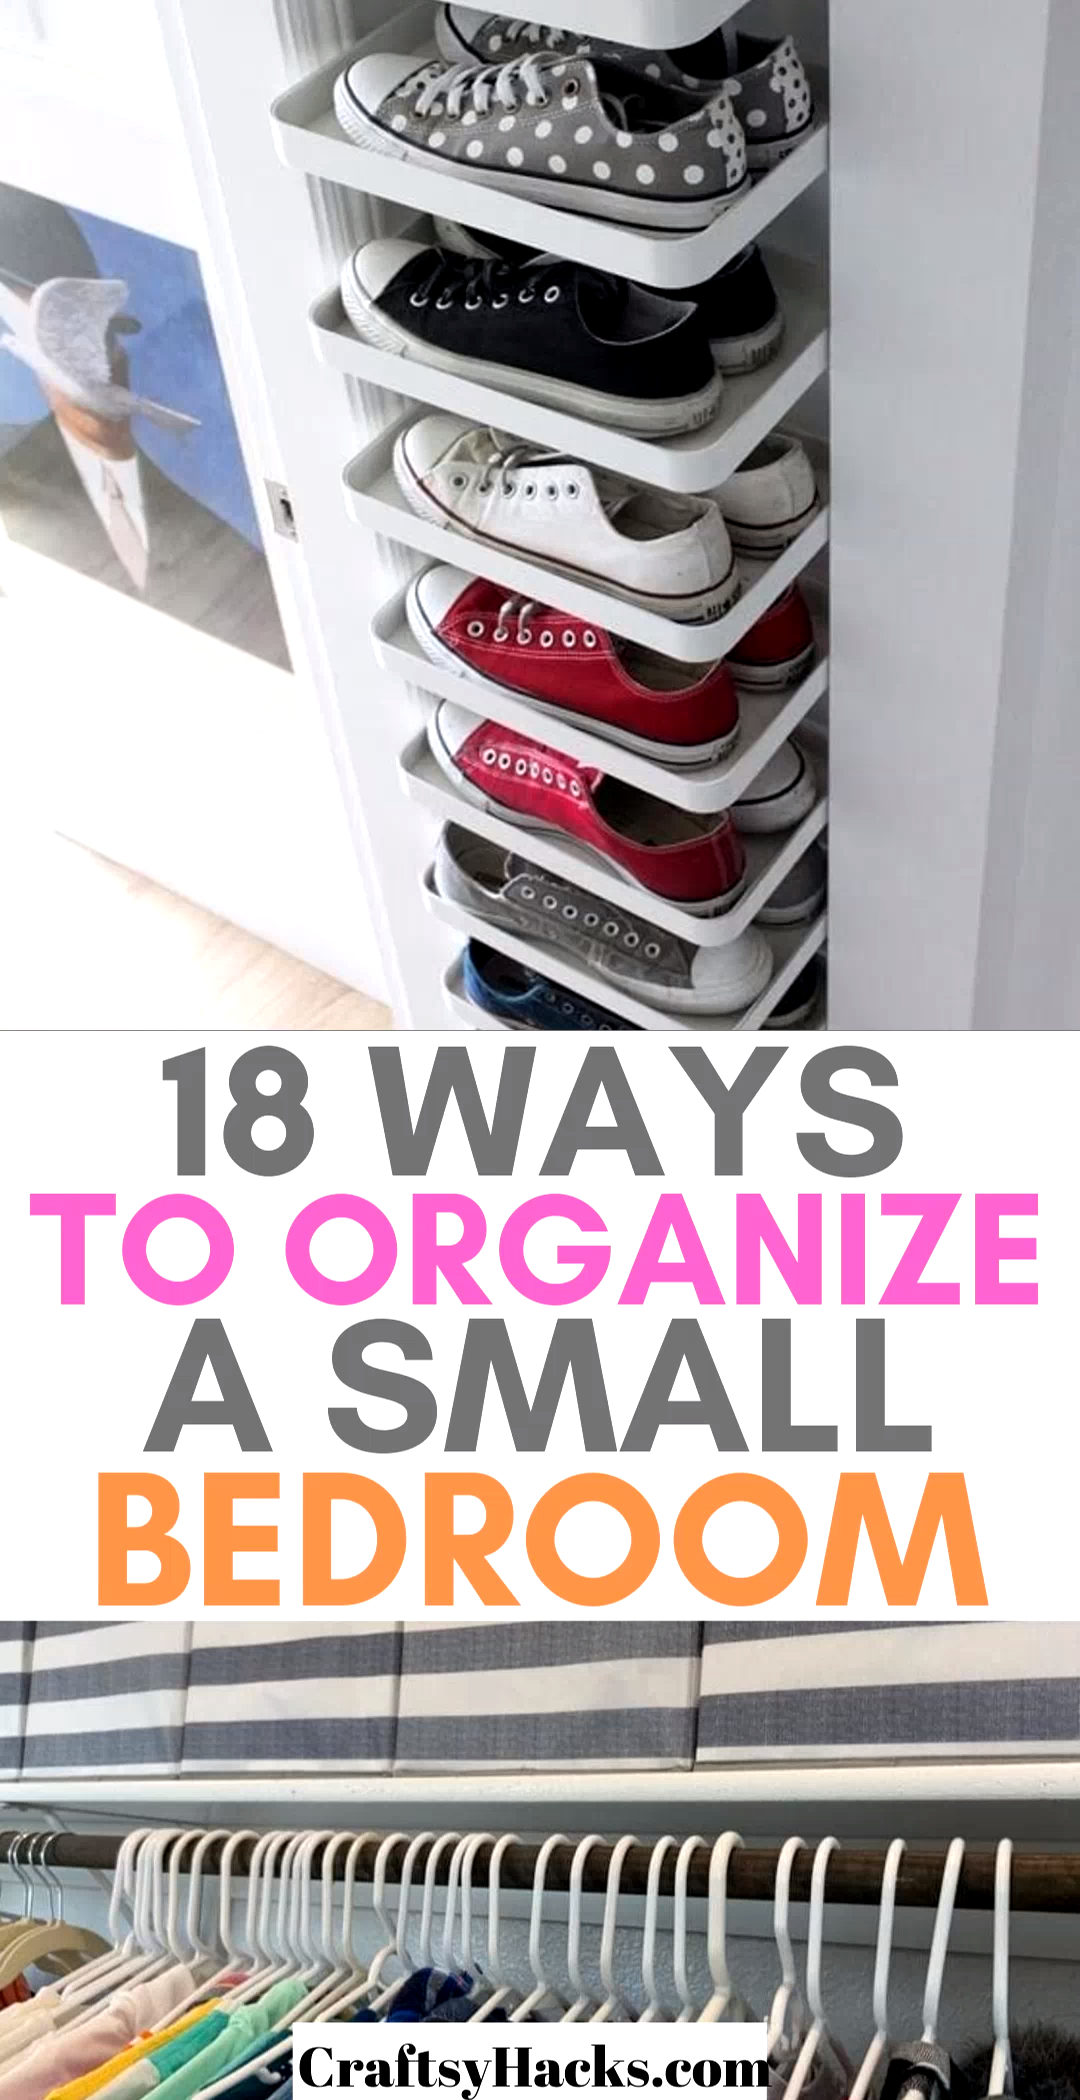 18 Ways to Organize a Small Bedroom - 18 Ways to Organize a Small Bedroom -   17 diy For Teens organization ideas